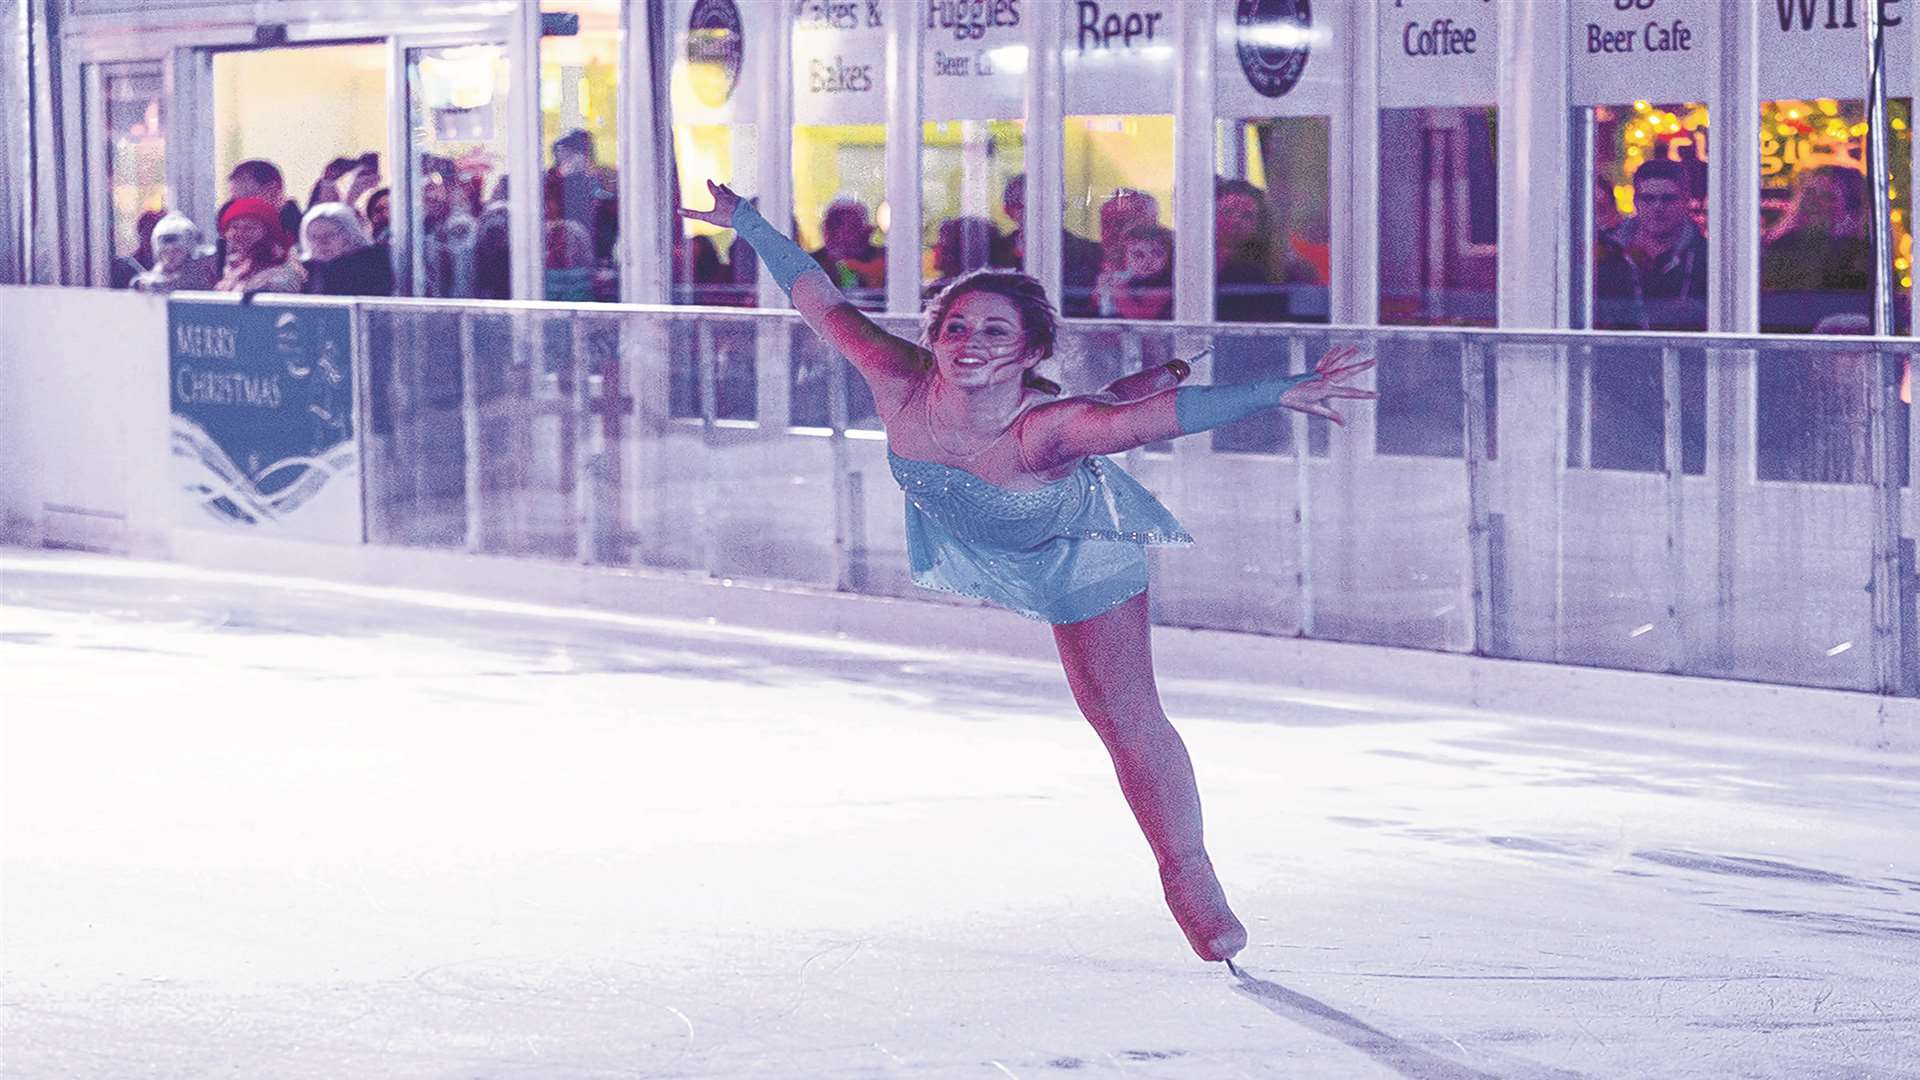 Could an ice-rink finally be coming to Ashford? Stock image.